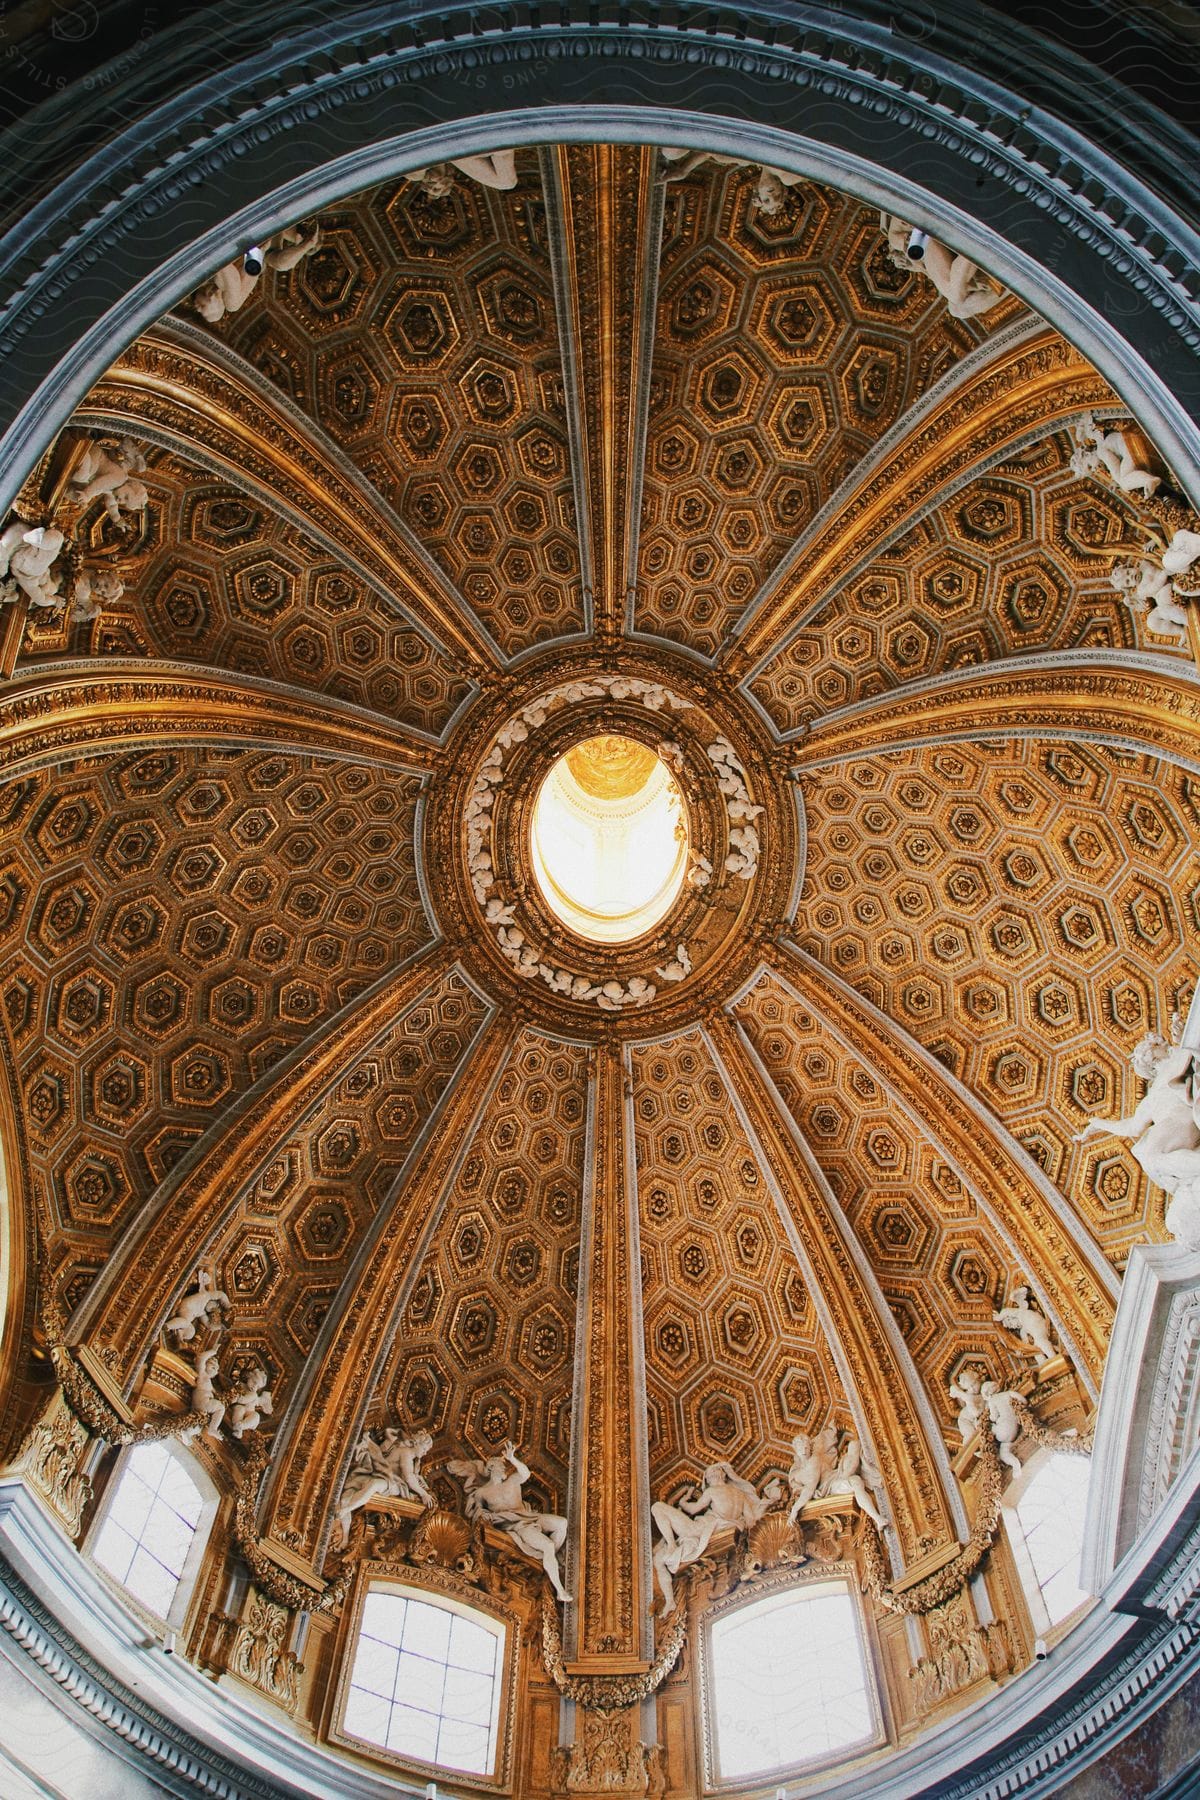 an ancient artistic roof with circular design and a round opening in the middle that allows sunlight through